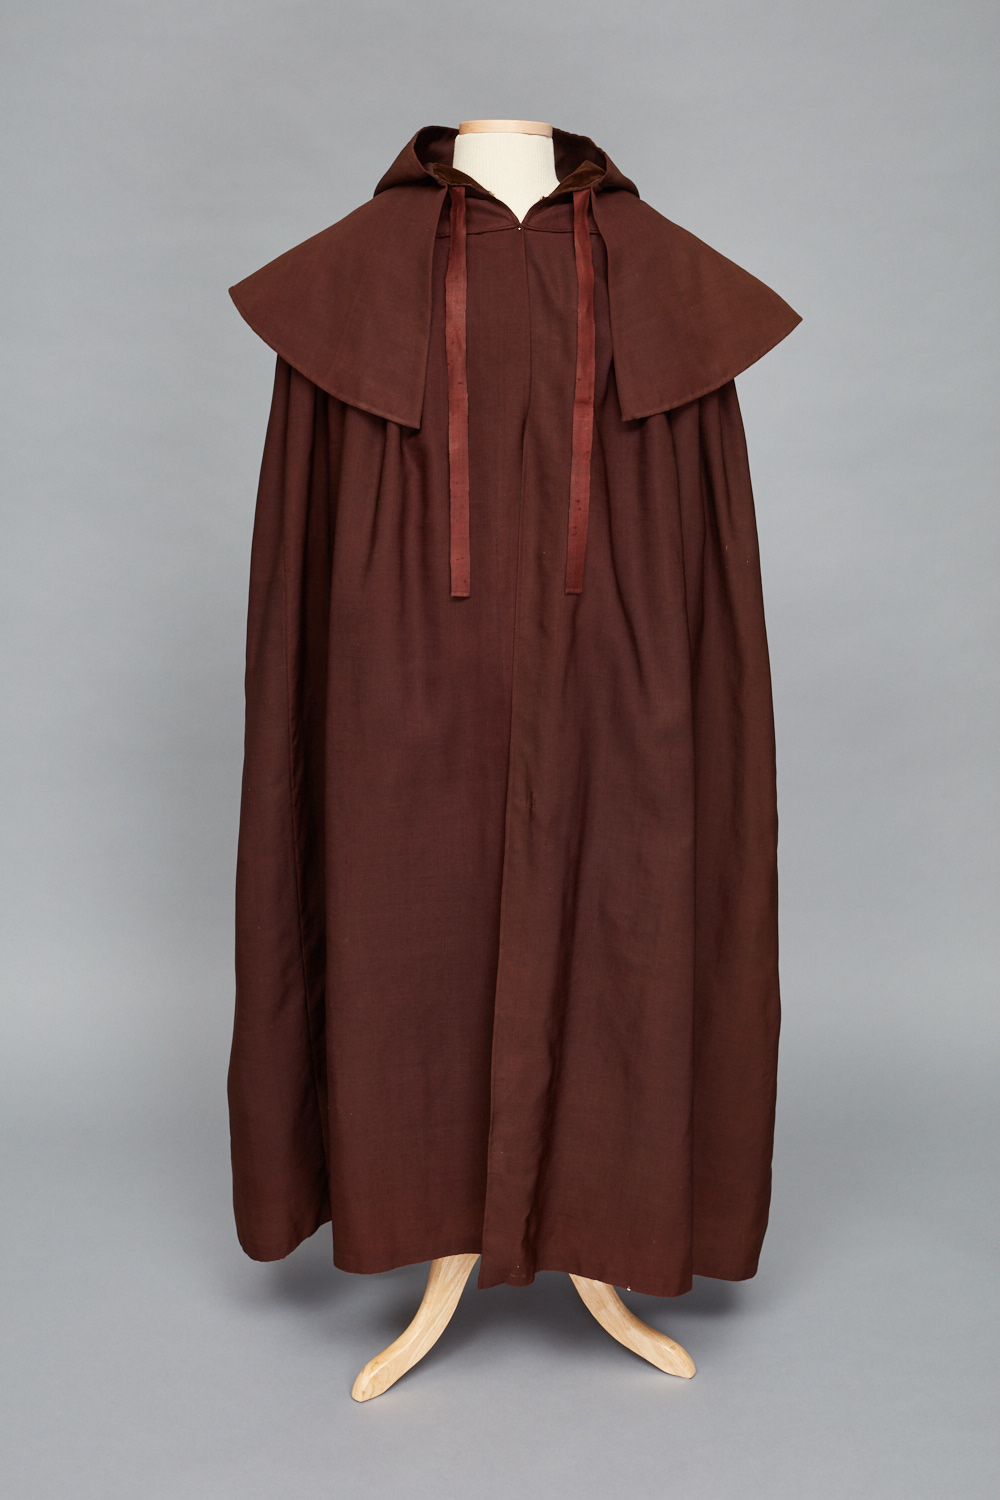 A brown cloak on a mannequin.